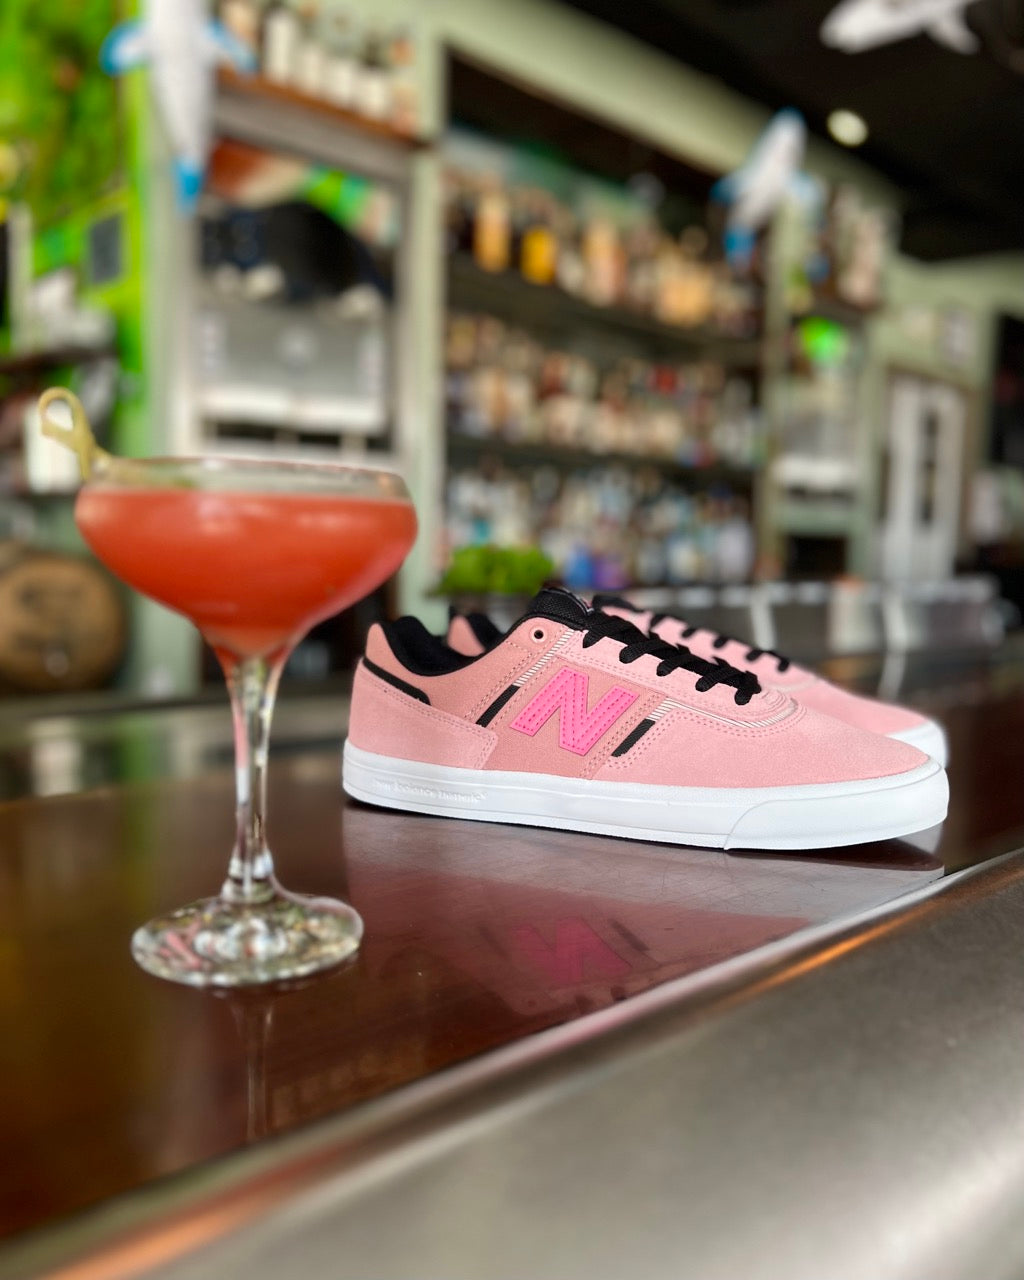 Image of the New Balance Numeric Jamie Foy 306 Flamingo Pink Skate shoes sitting utop a bar next to a fruity drink